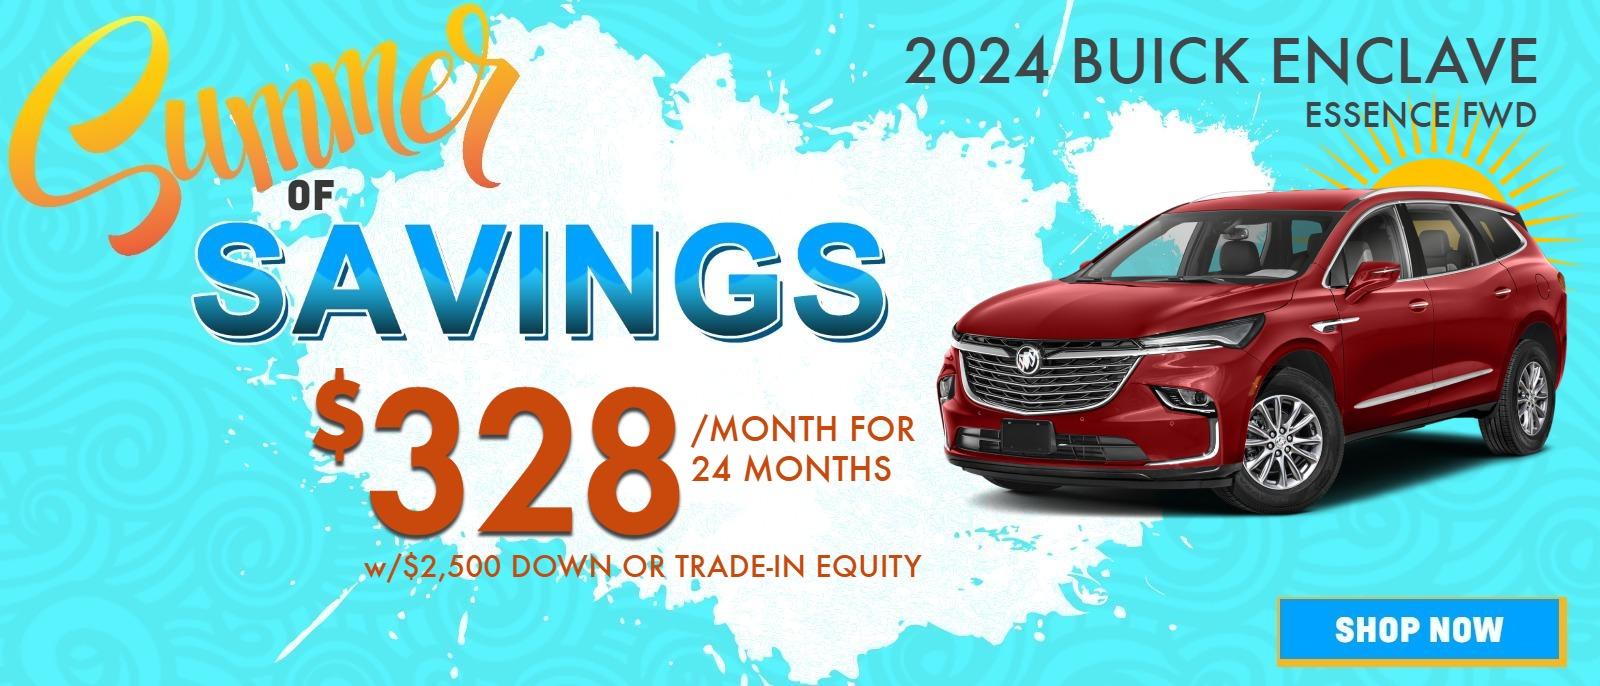 LEASE A 2024 ENCLAVE ESSENCE FWD FOR $328 PER MONTH FOR 24 MONTHS FROM MIKE YOUNG BUICK GMC IN FRANKENMUTH, MI